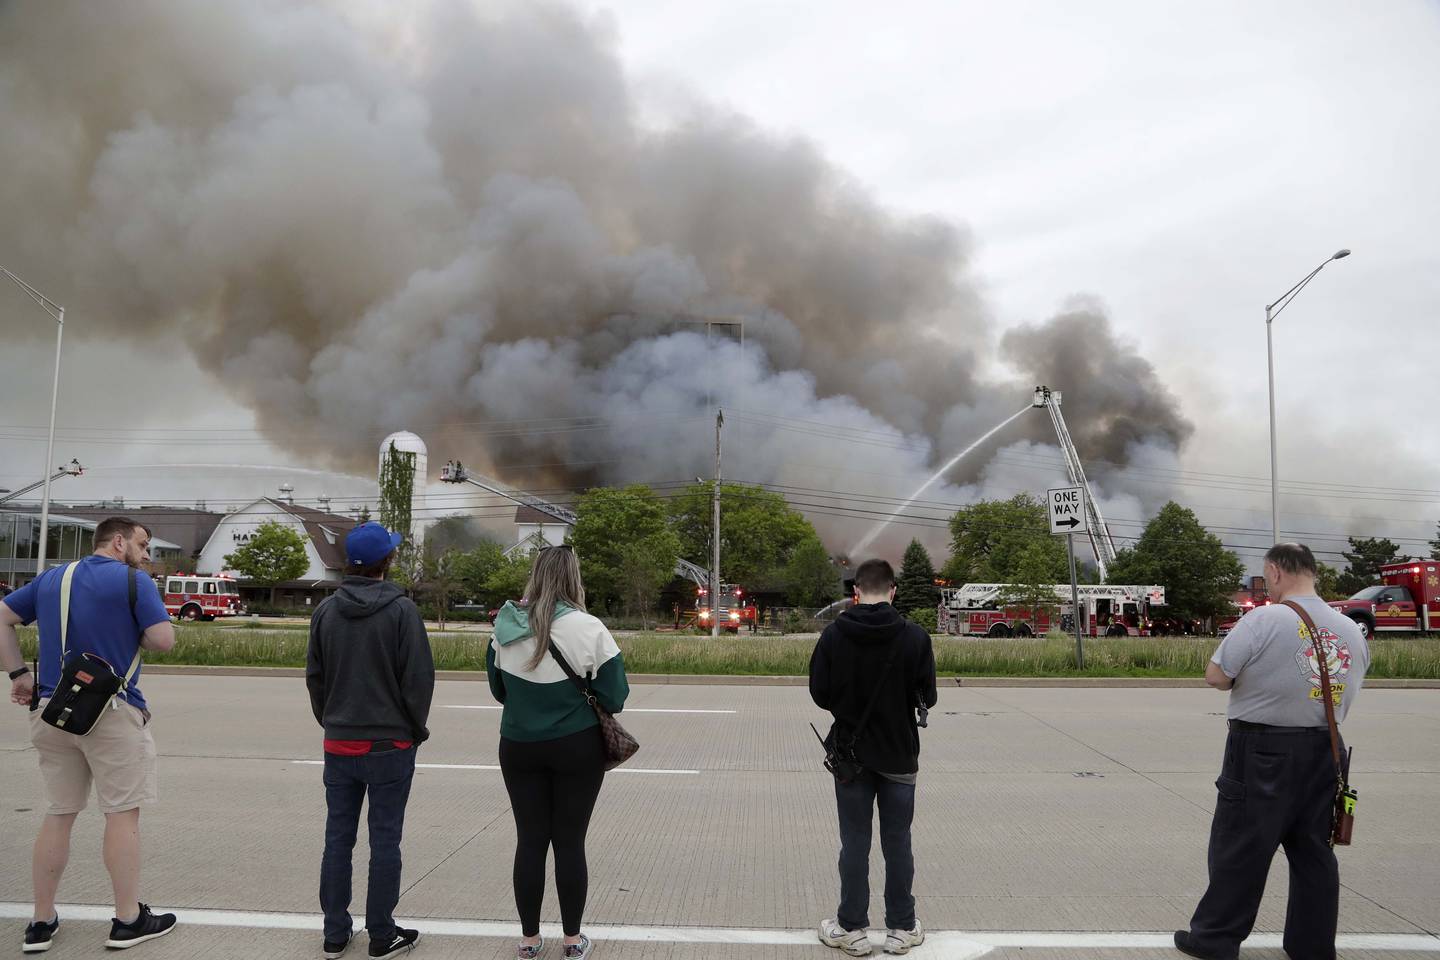 Onlookers watch as firefighters battle a blaze at the former Pheasant Run Resort on Saturday in St. Charles.